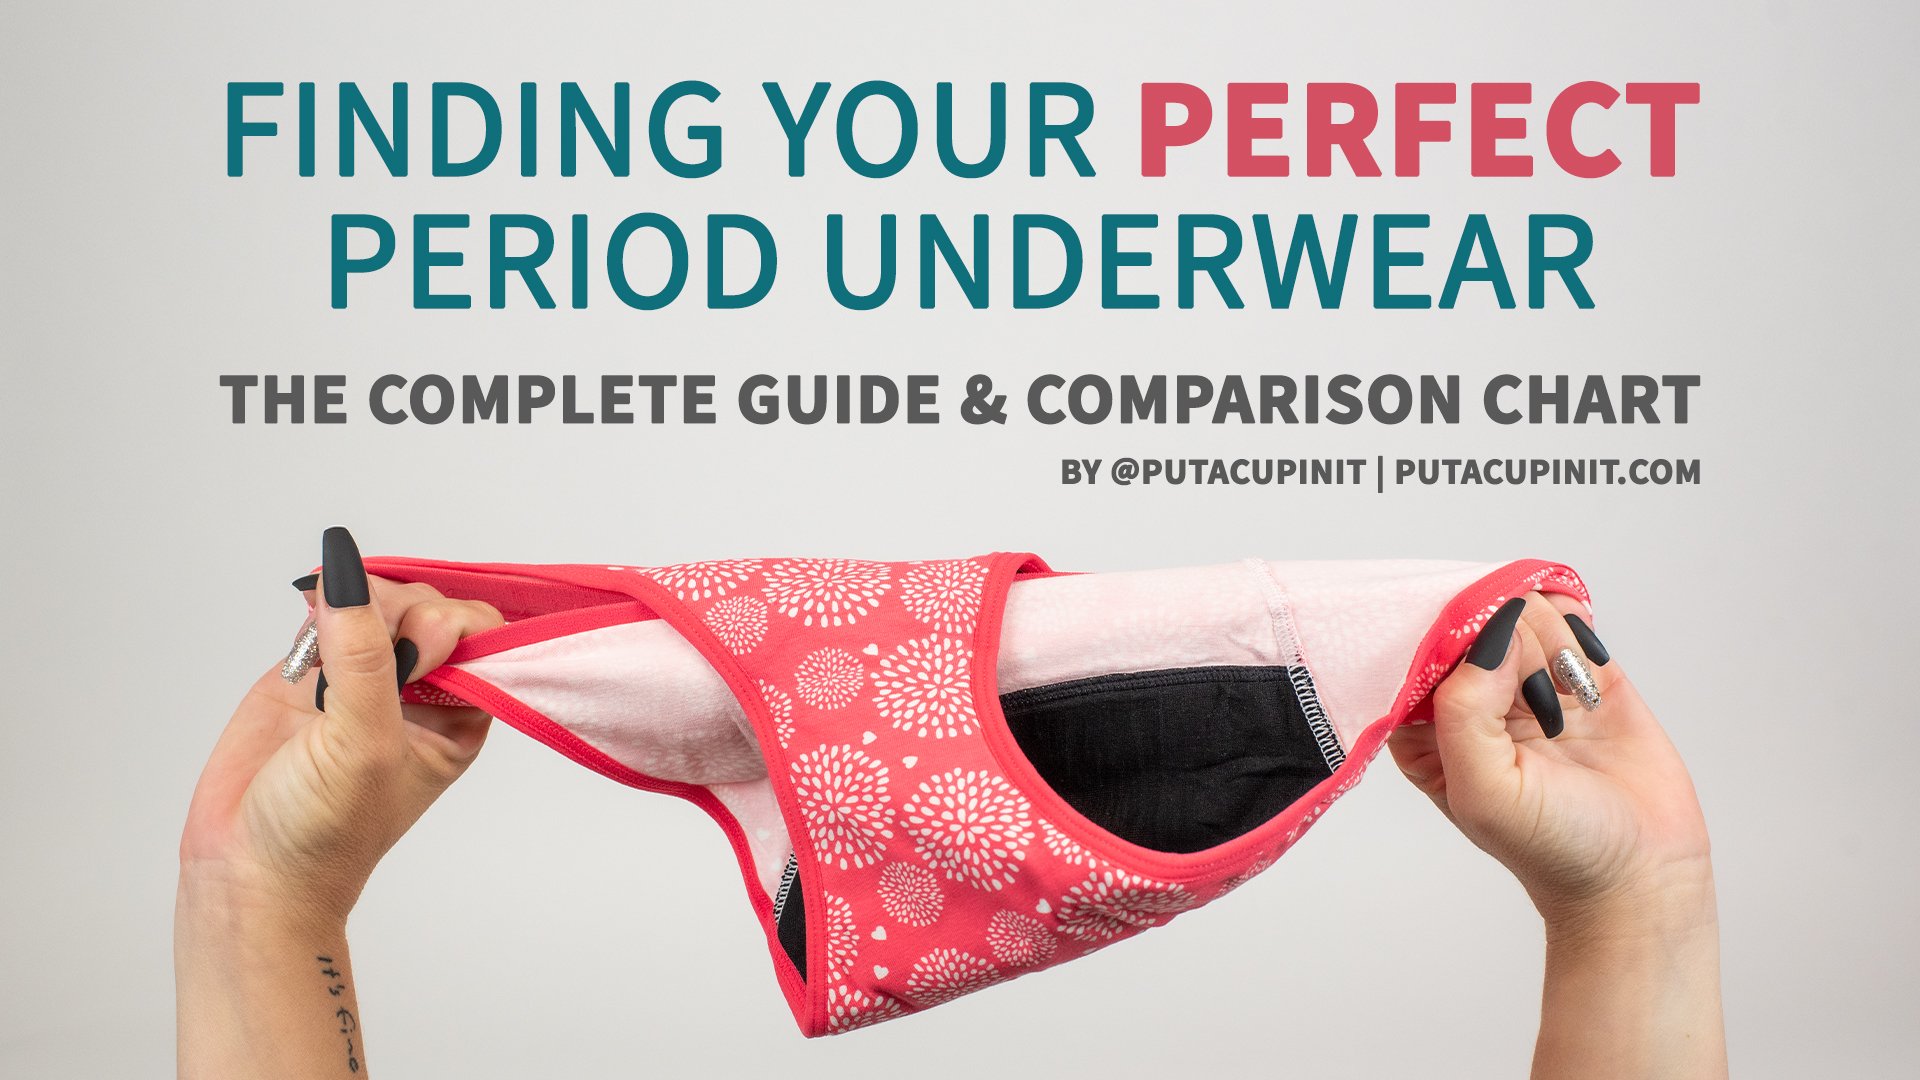  Bambody Absorbent Boxer: Period Underwear for all Day